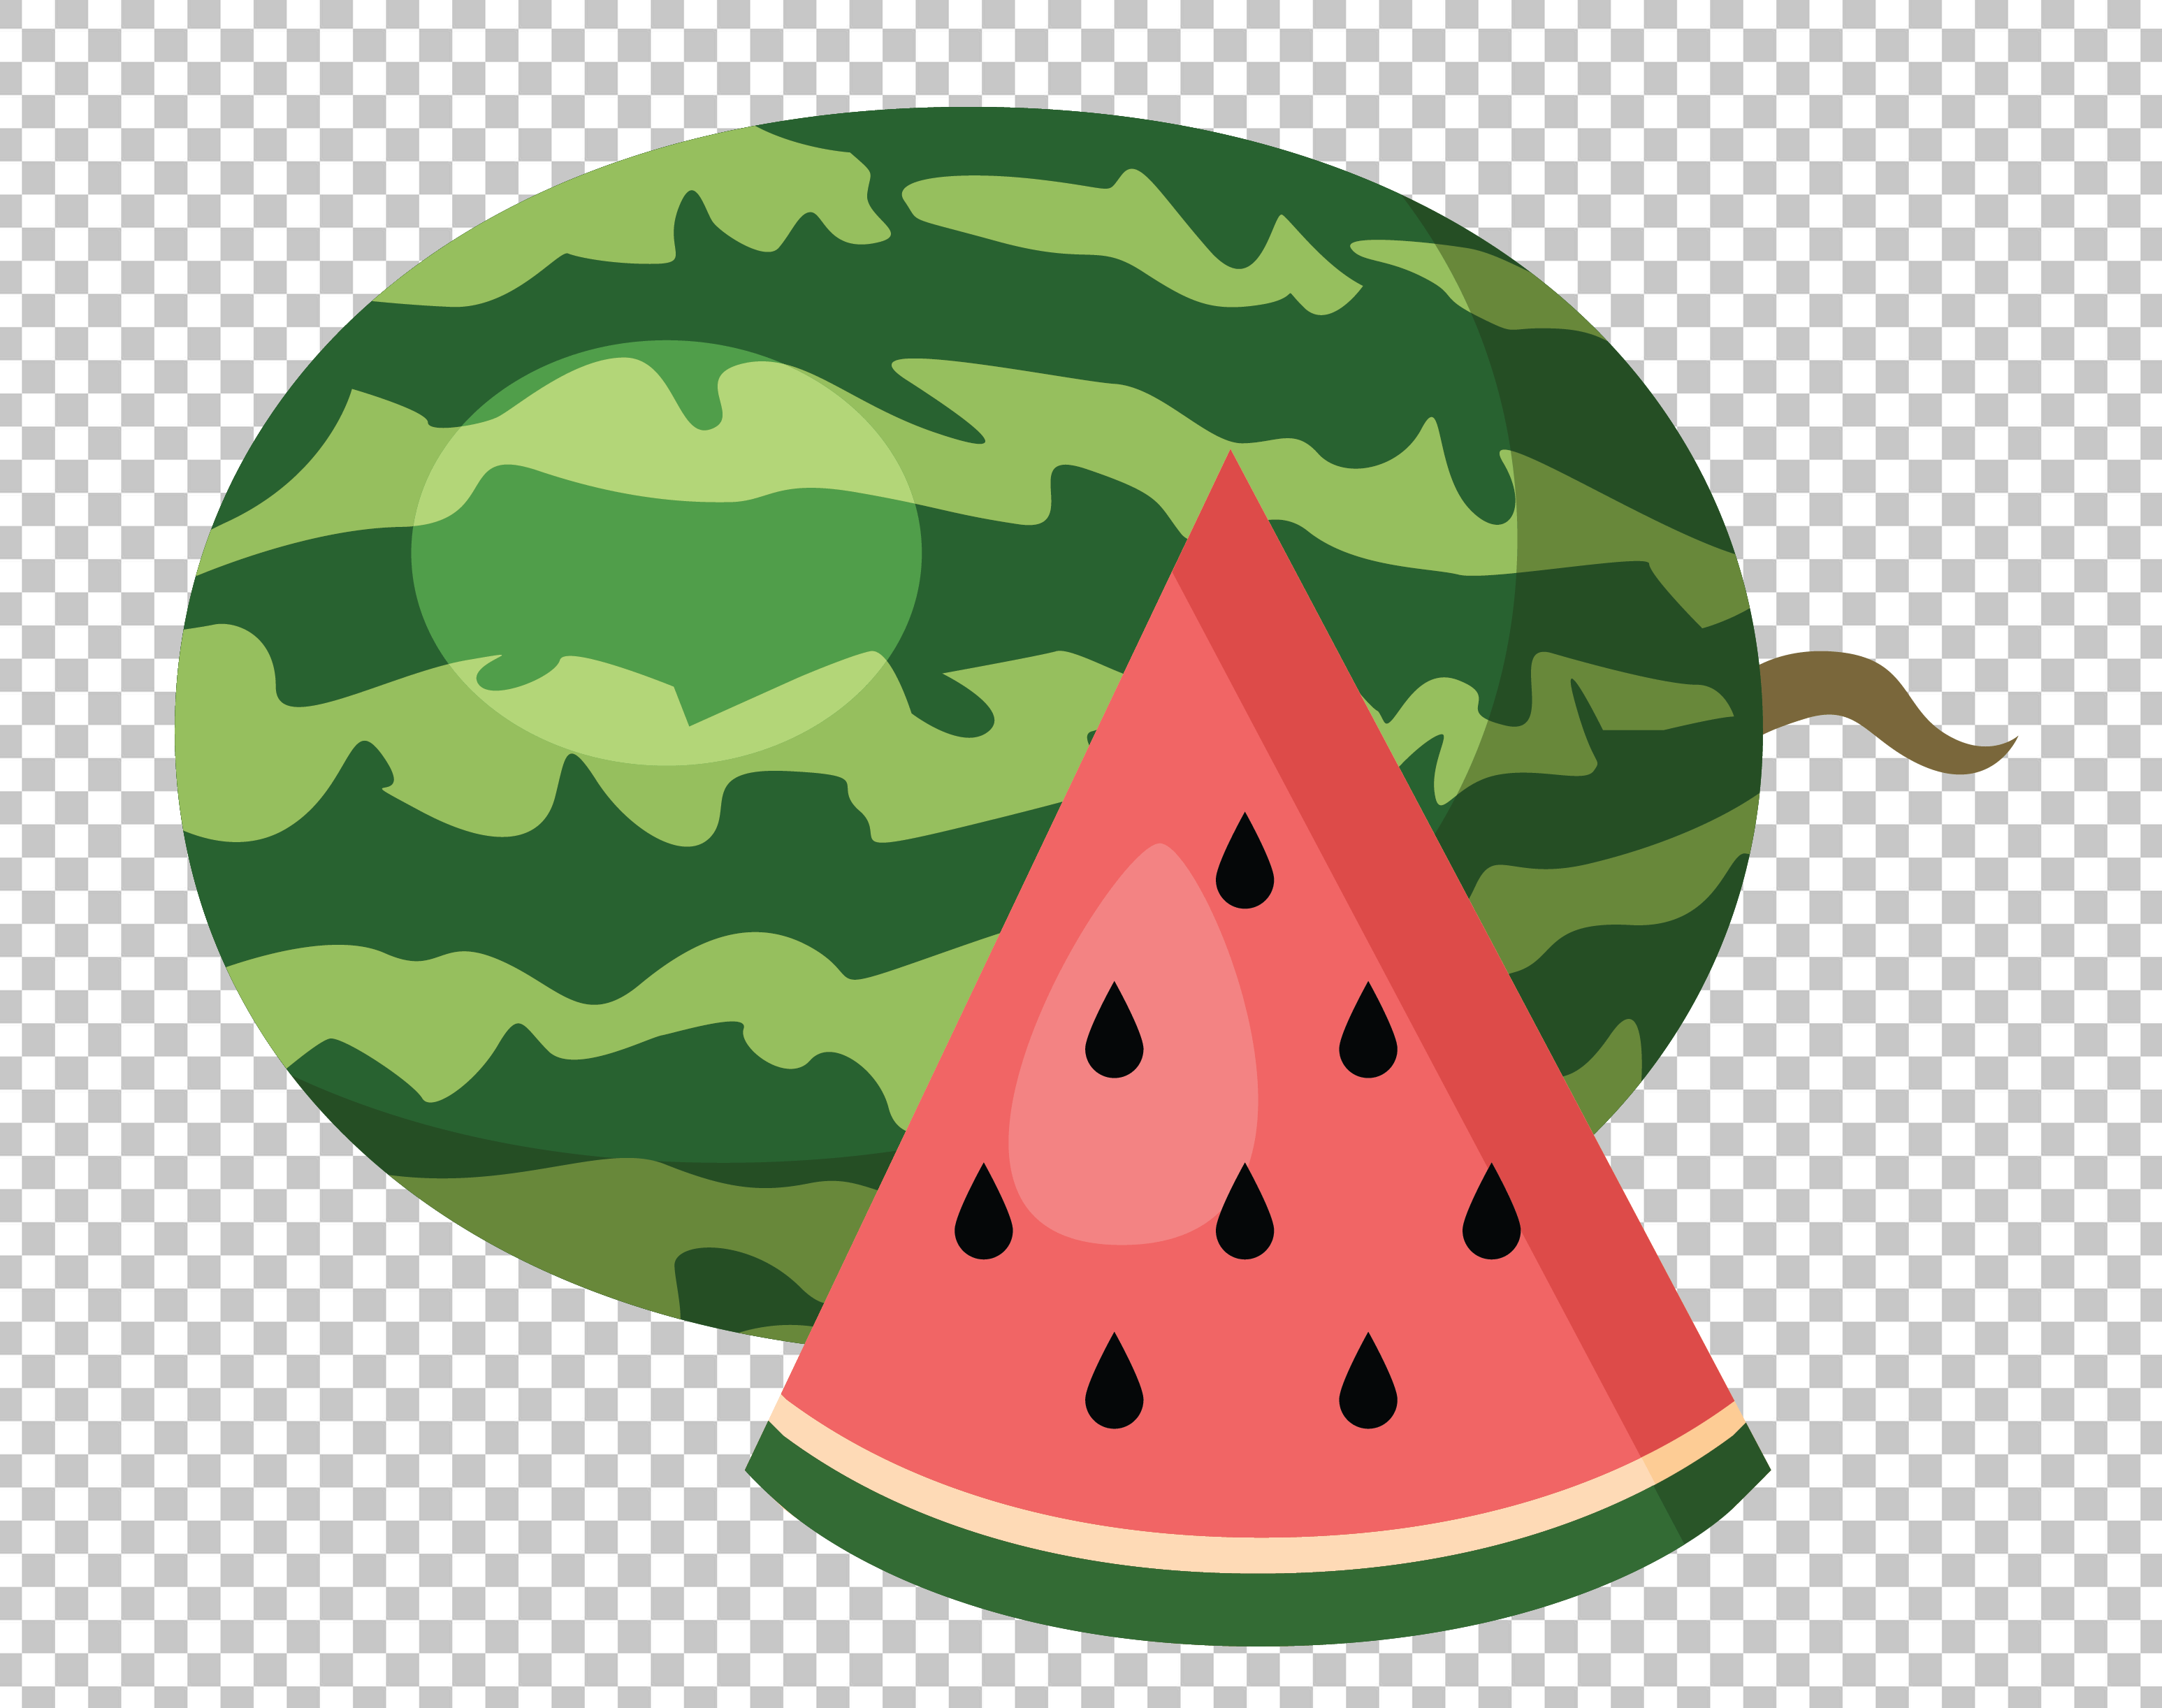 Watermelon Slice and Whole Watermelon PNG Image on Transparent Background